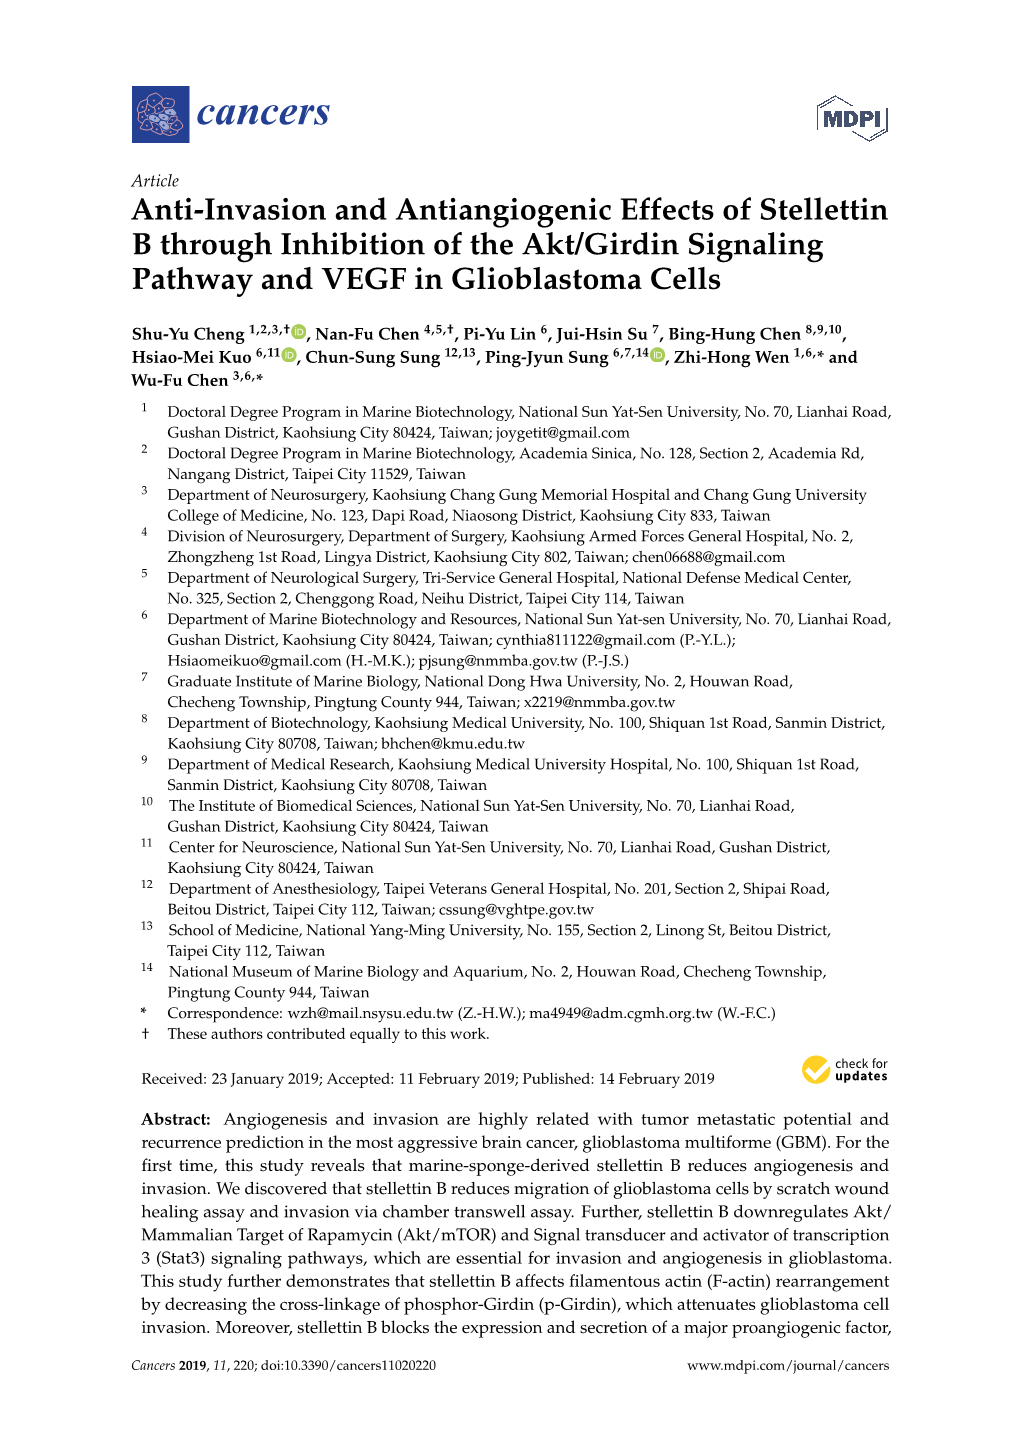 Anti-Invasion and Antiangiogenic Effects of Stellettin B Through Inhibition of the Akt/Girdin Signaling Pathway and VEGF in Glioblastoma Cells